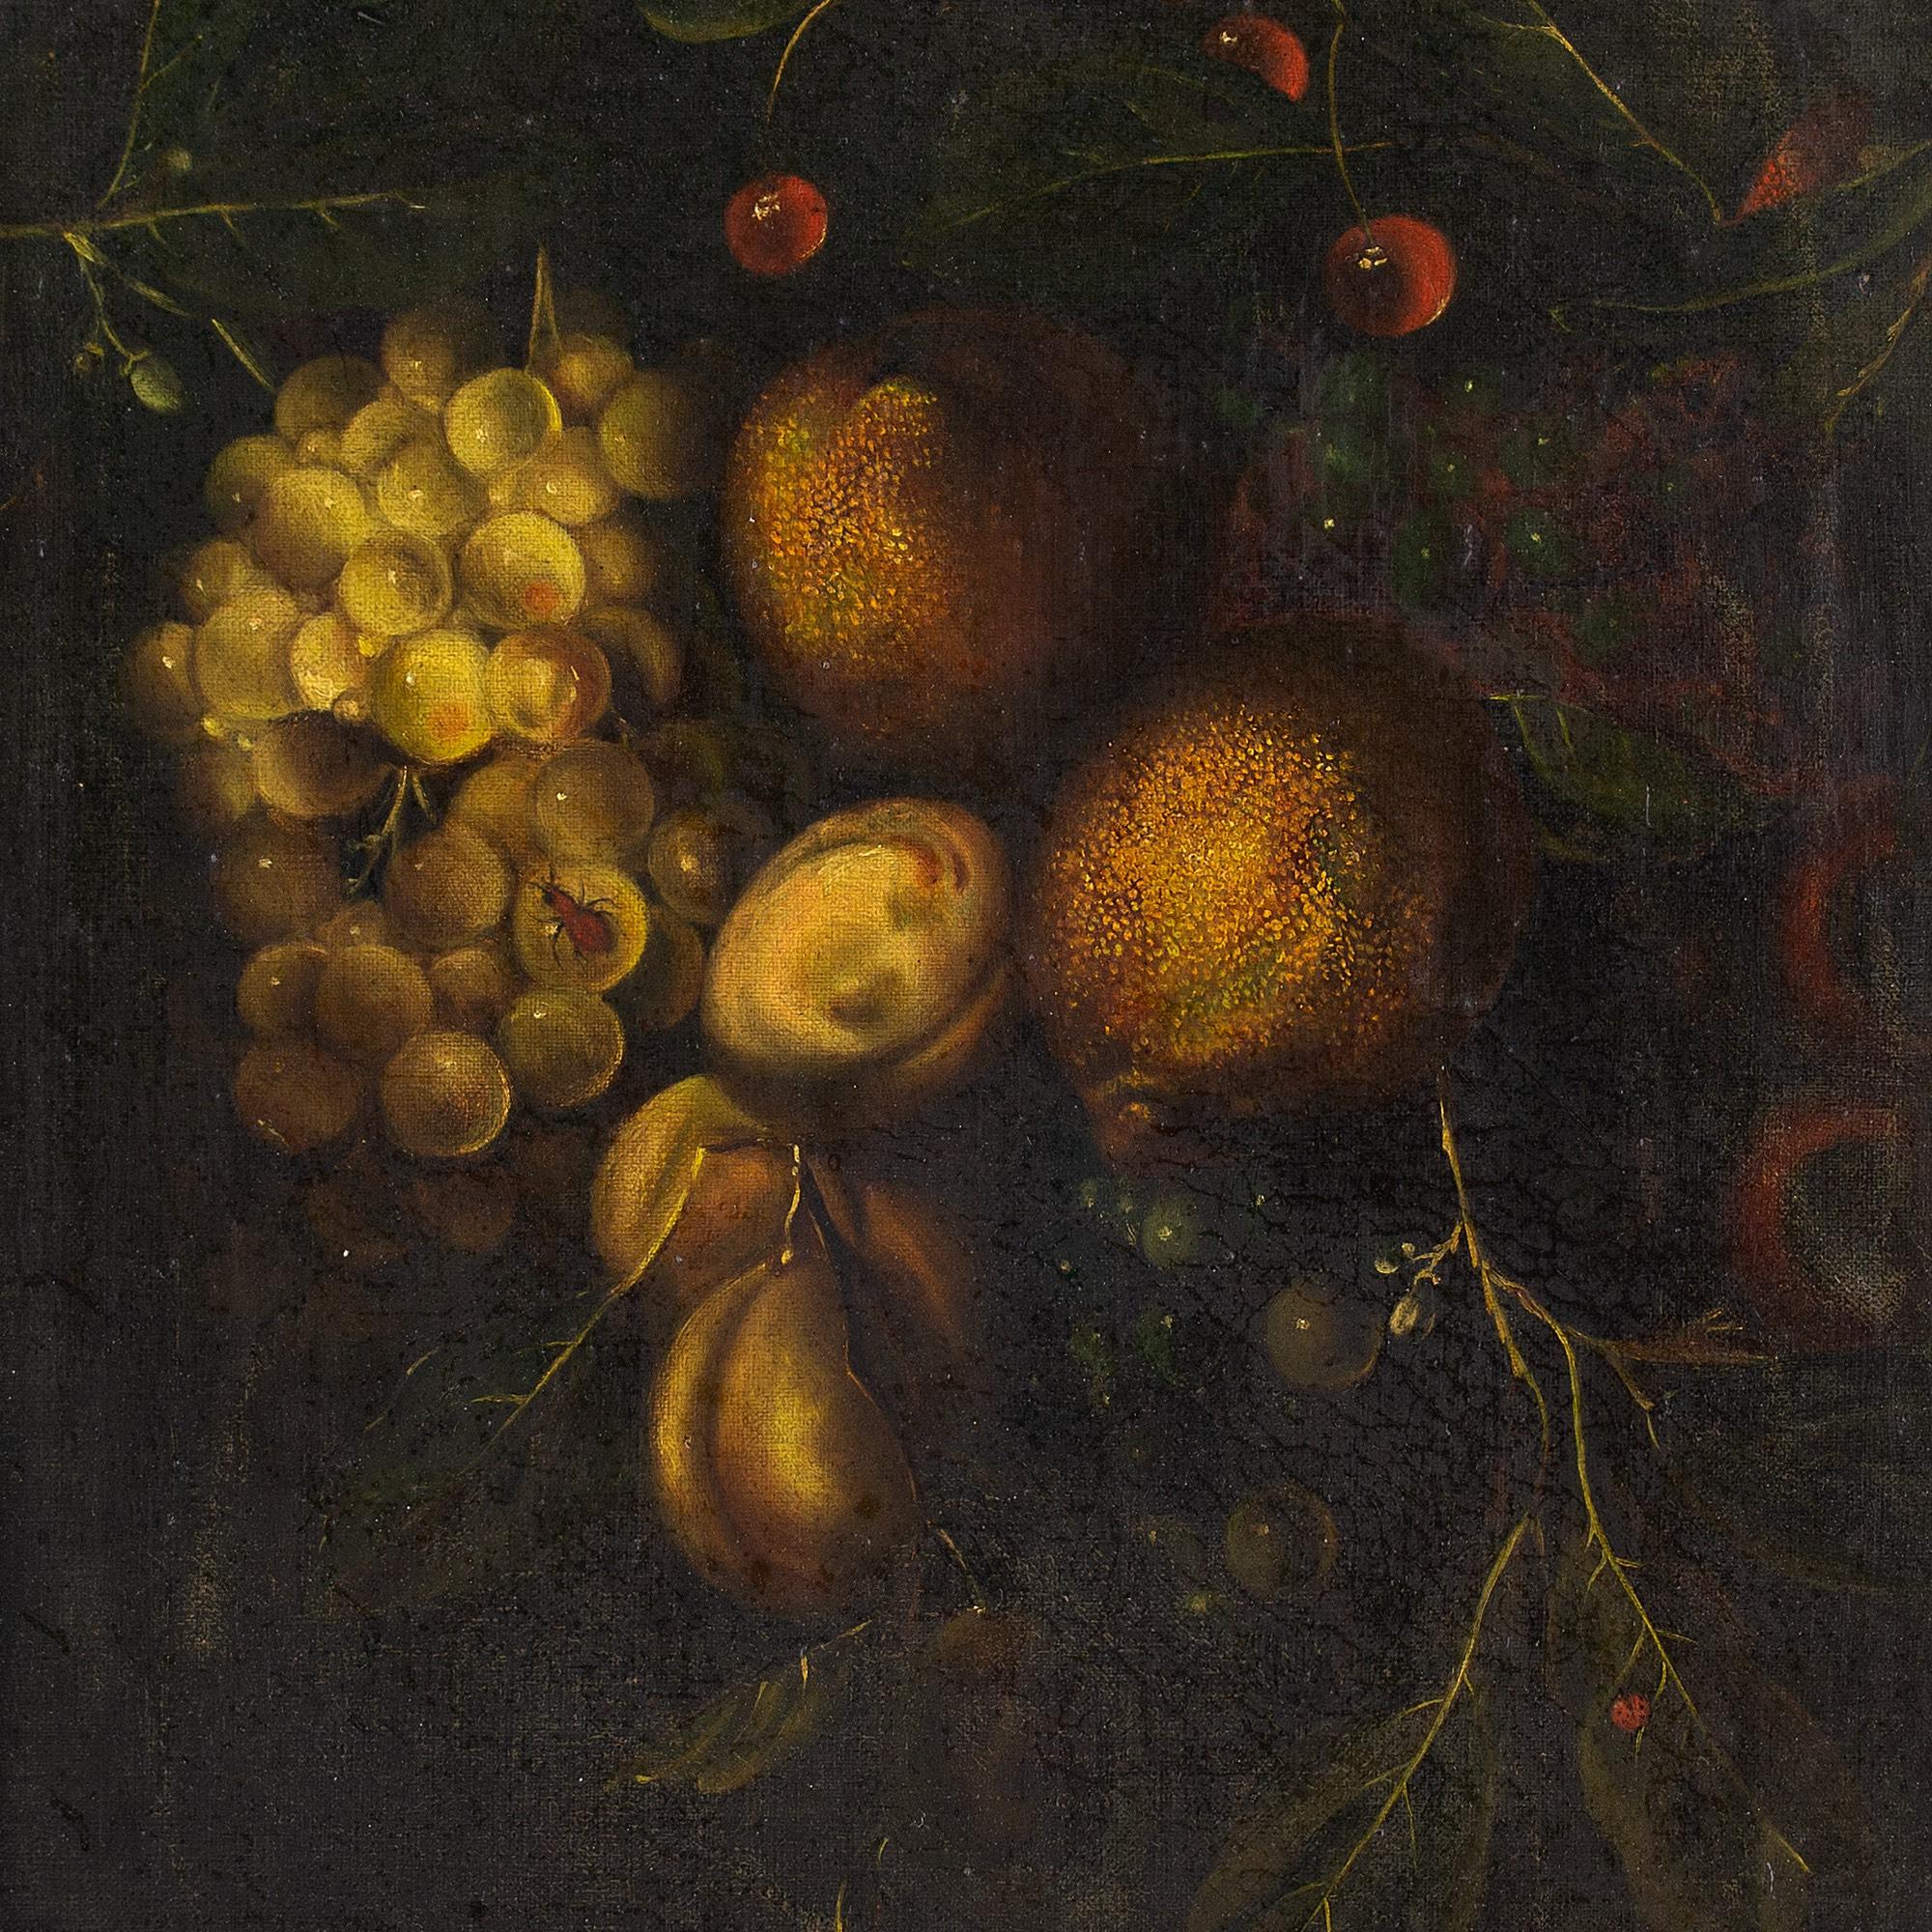 A mid-18th-century oil on canvas depicting an arrangement of fruit including cherries and grapes. The style has its roots in the Dutch golden age of painting but it’s probably French or Flemish.

Over time, the details of this painting have become